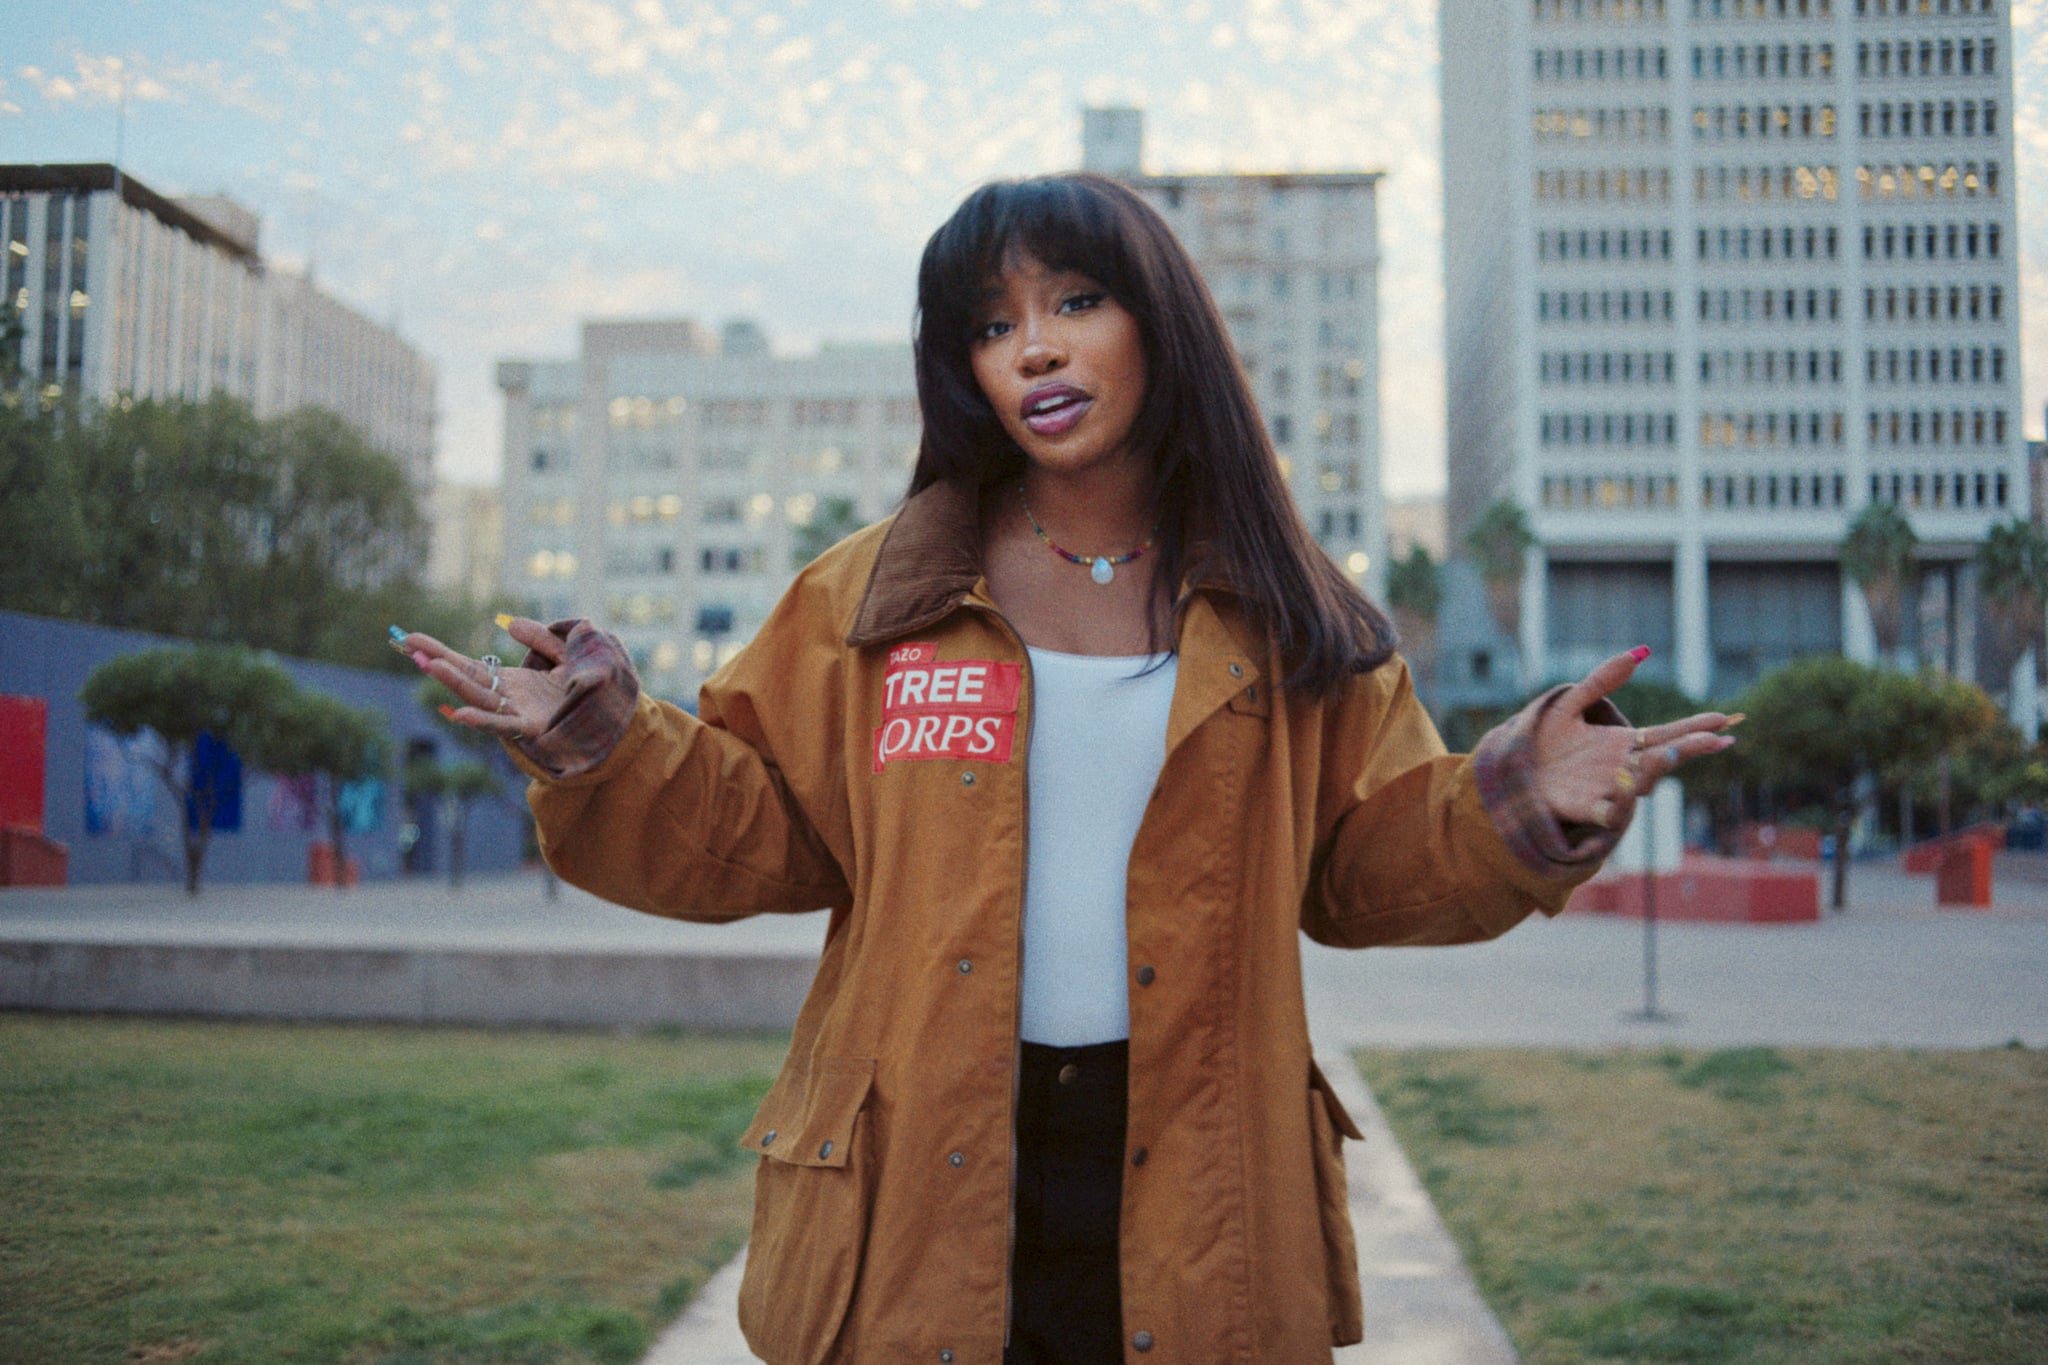 SZA on Her New Album and Fight For Environmental Justice